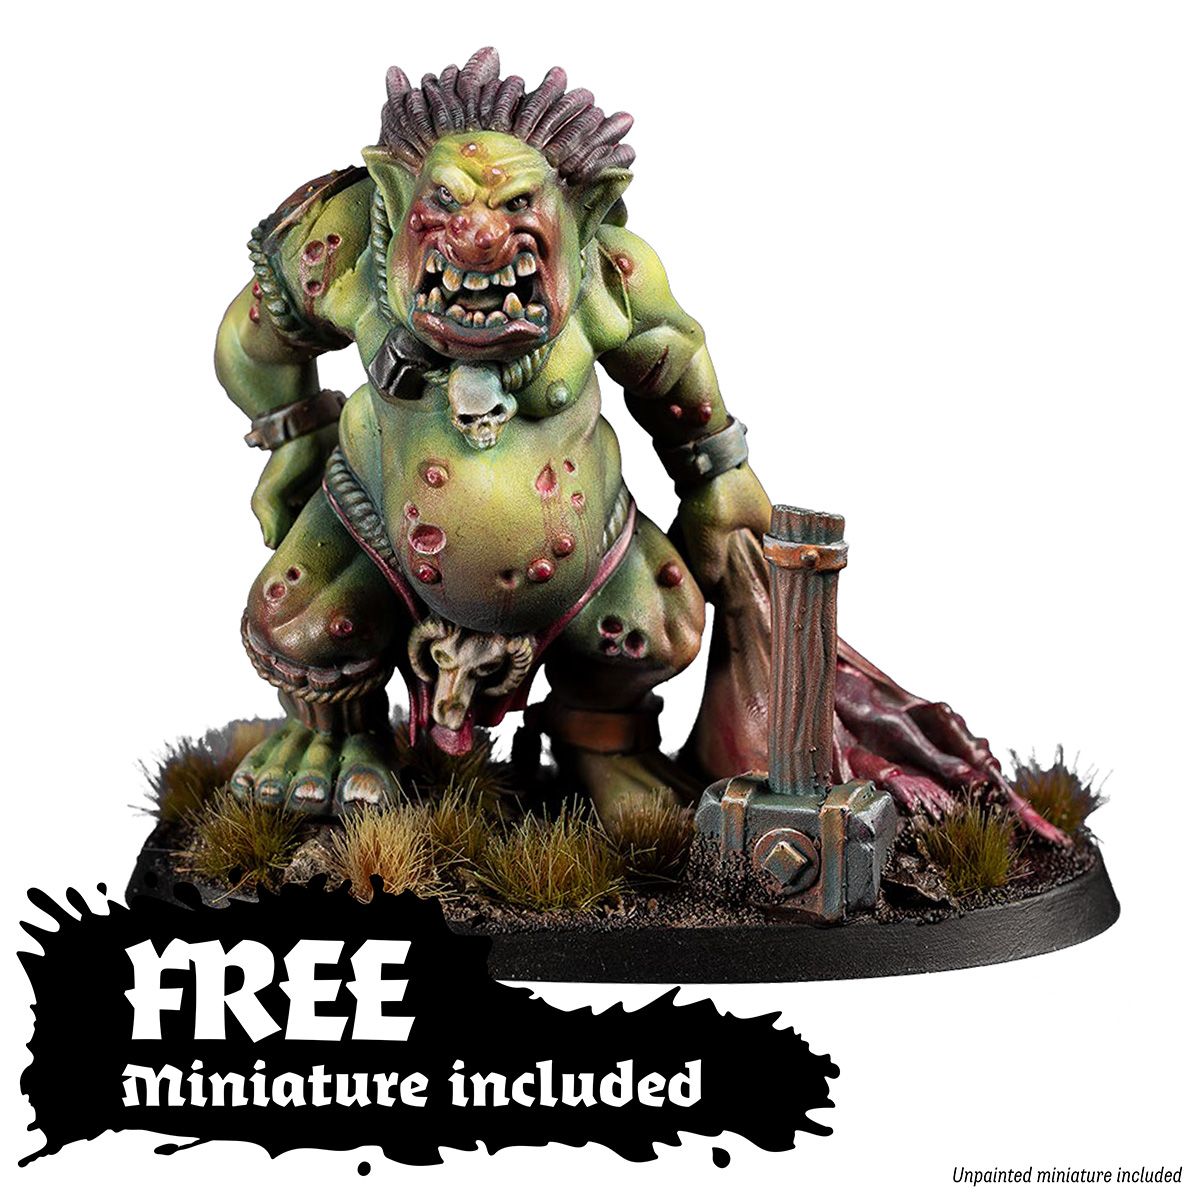 The Army Painter - Gamemaster: Wandering Monsters Paint Set